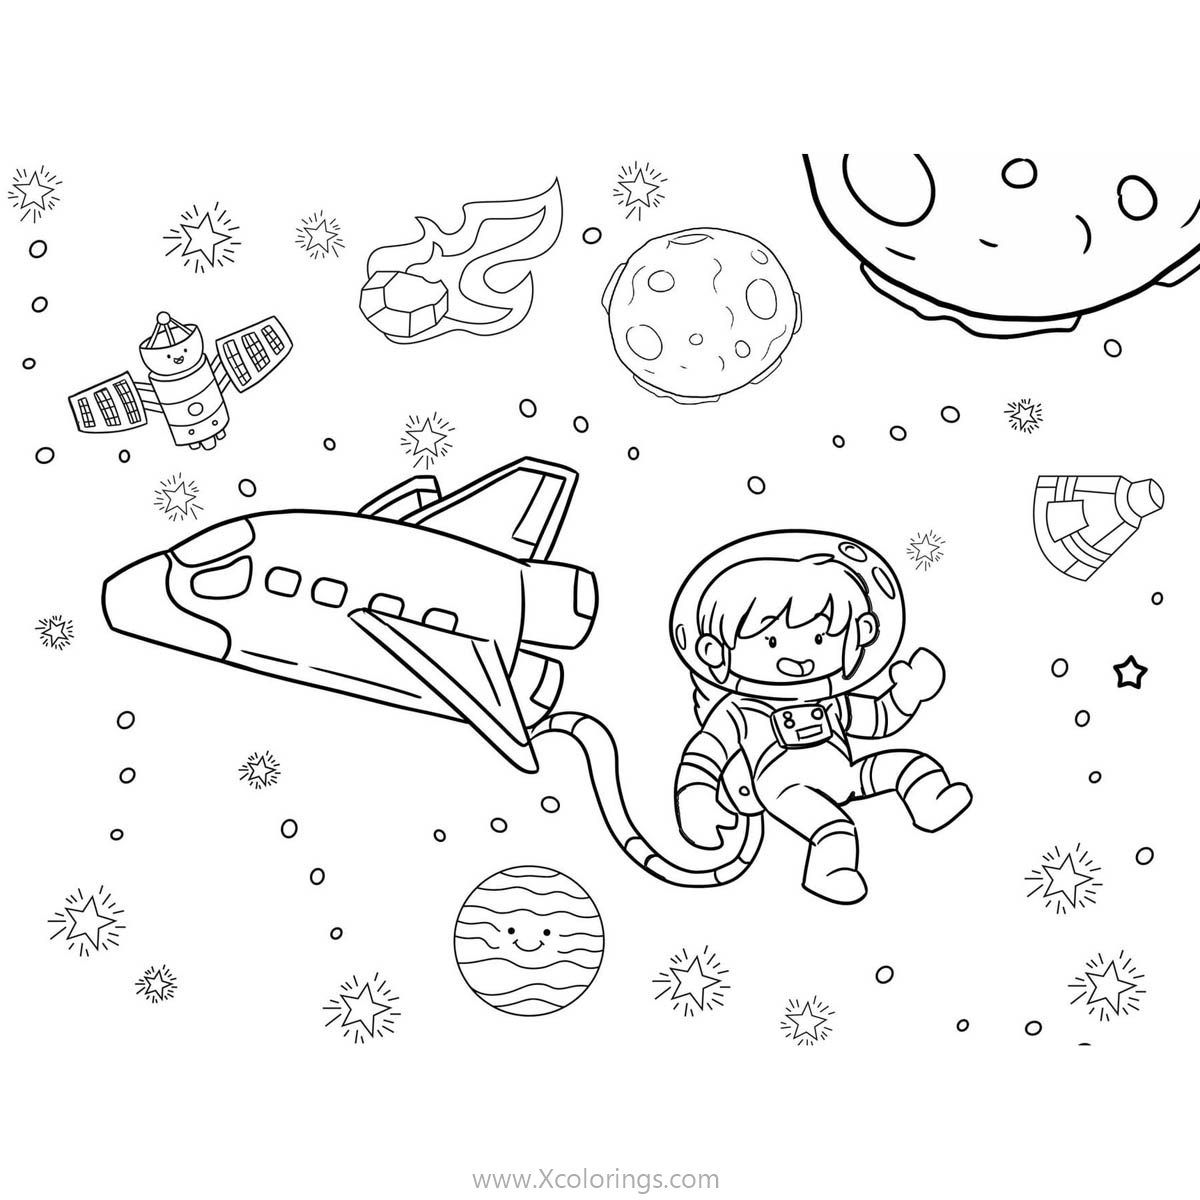 Free Astronaut Boy and Spaceship Coloring Pages printable